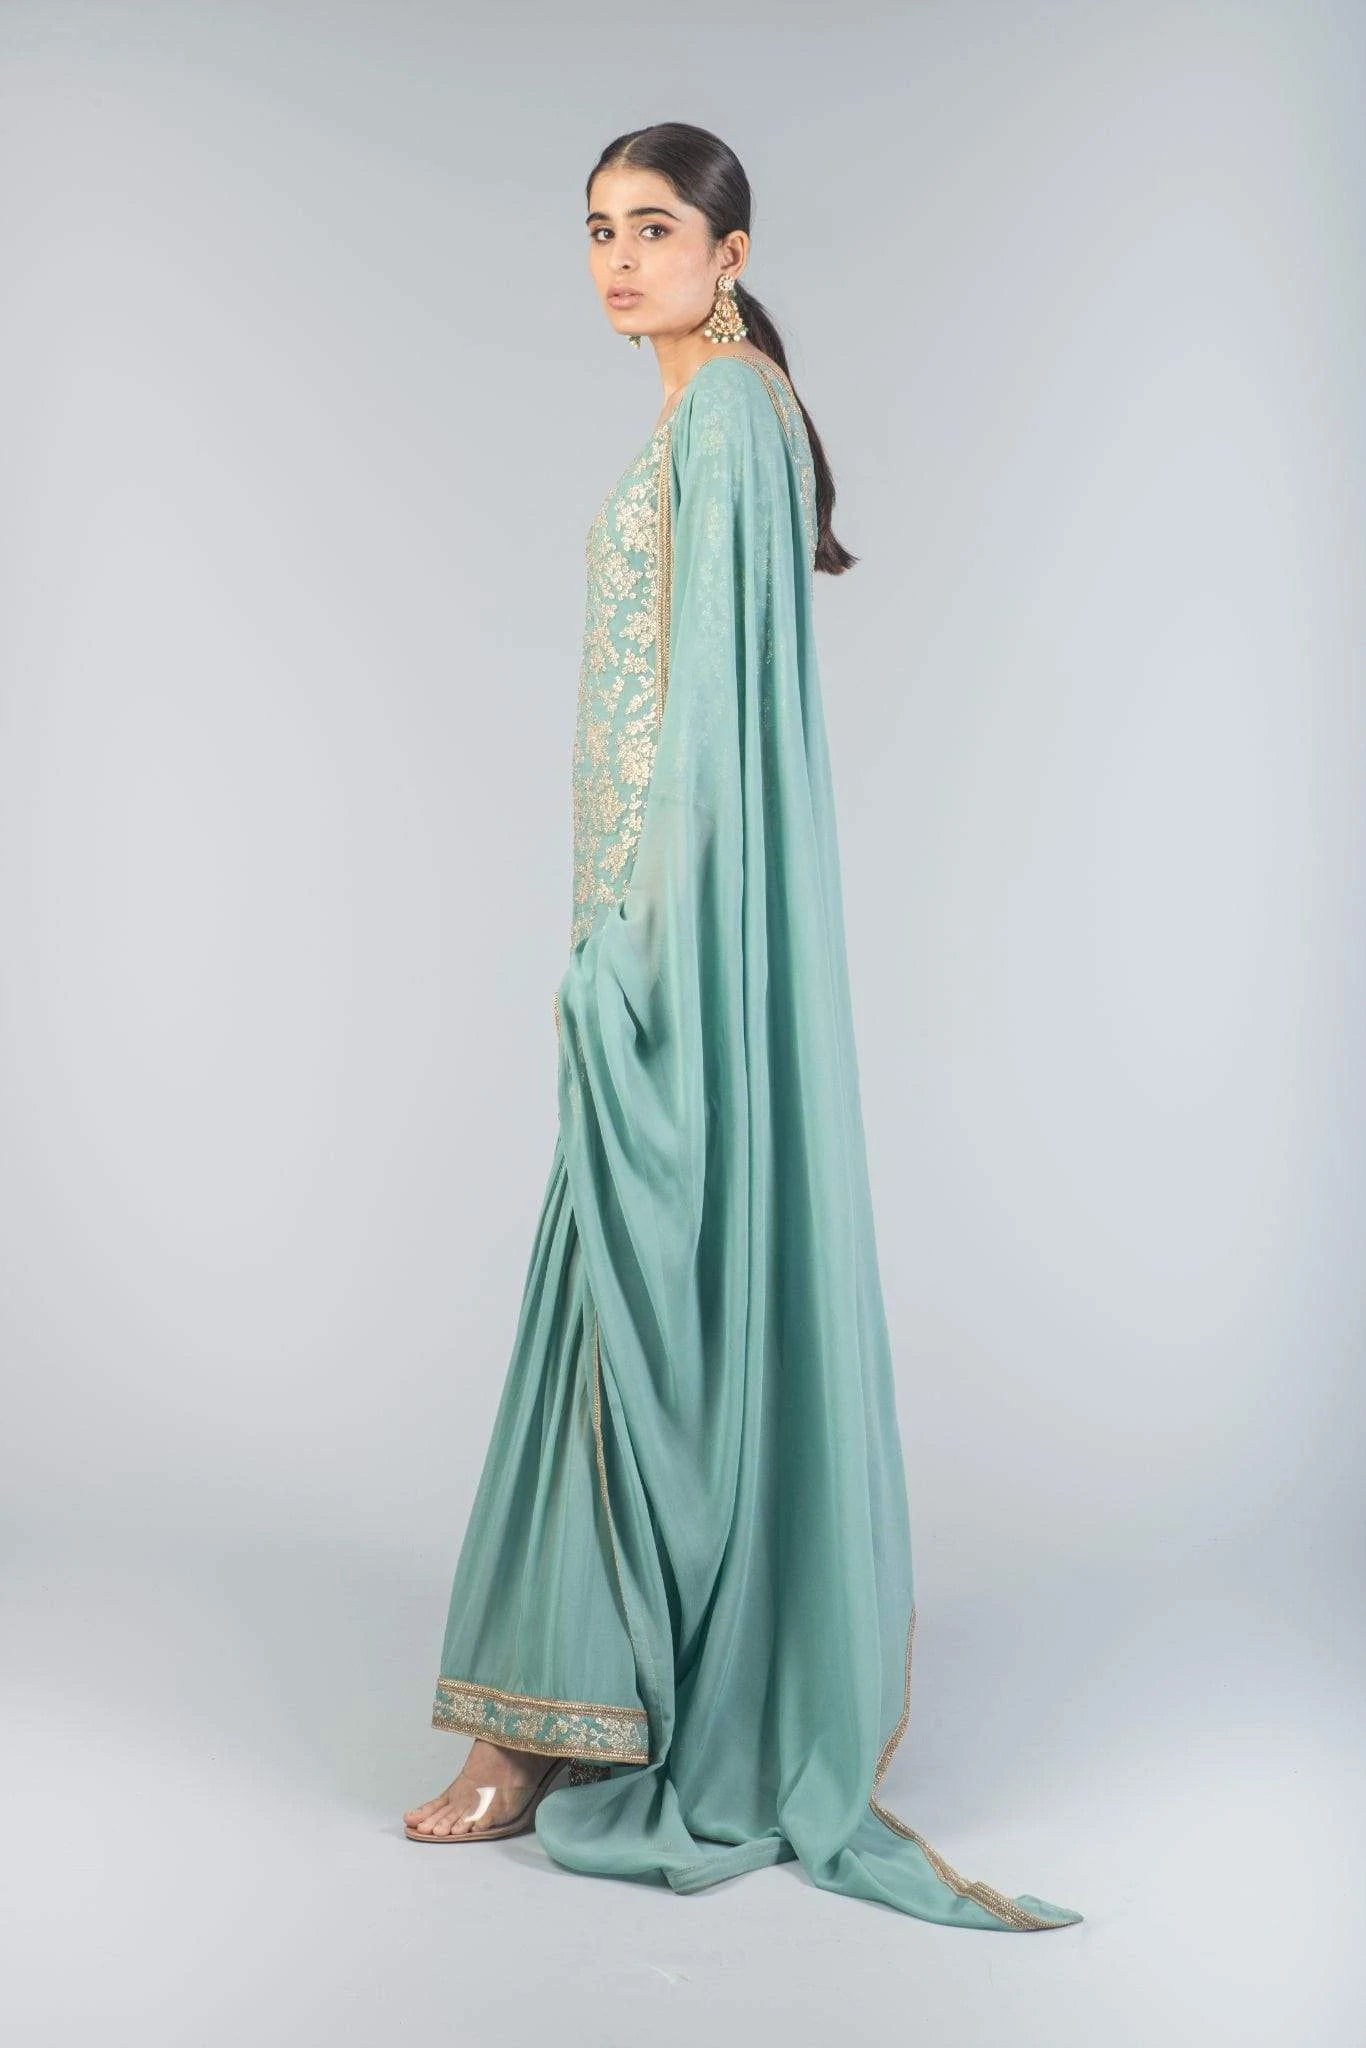 Teal Georgette Skirt Set Indian Clothing in Denver, CO, Aurora, CO, Boulder, CO, Fort Collins, CO, Colorado Springs, CO, Parker, CO, Highlands Ranch, CO, Cherry Creek, CO, Centennial, CO, and Longmont, CO. NATIONWIDE SHIPPING USA- India Fashion X